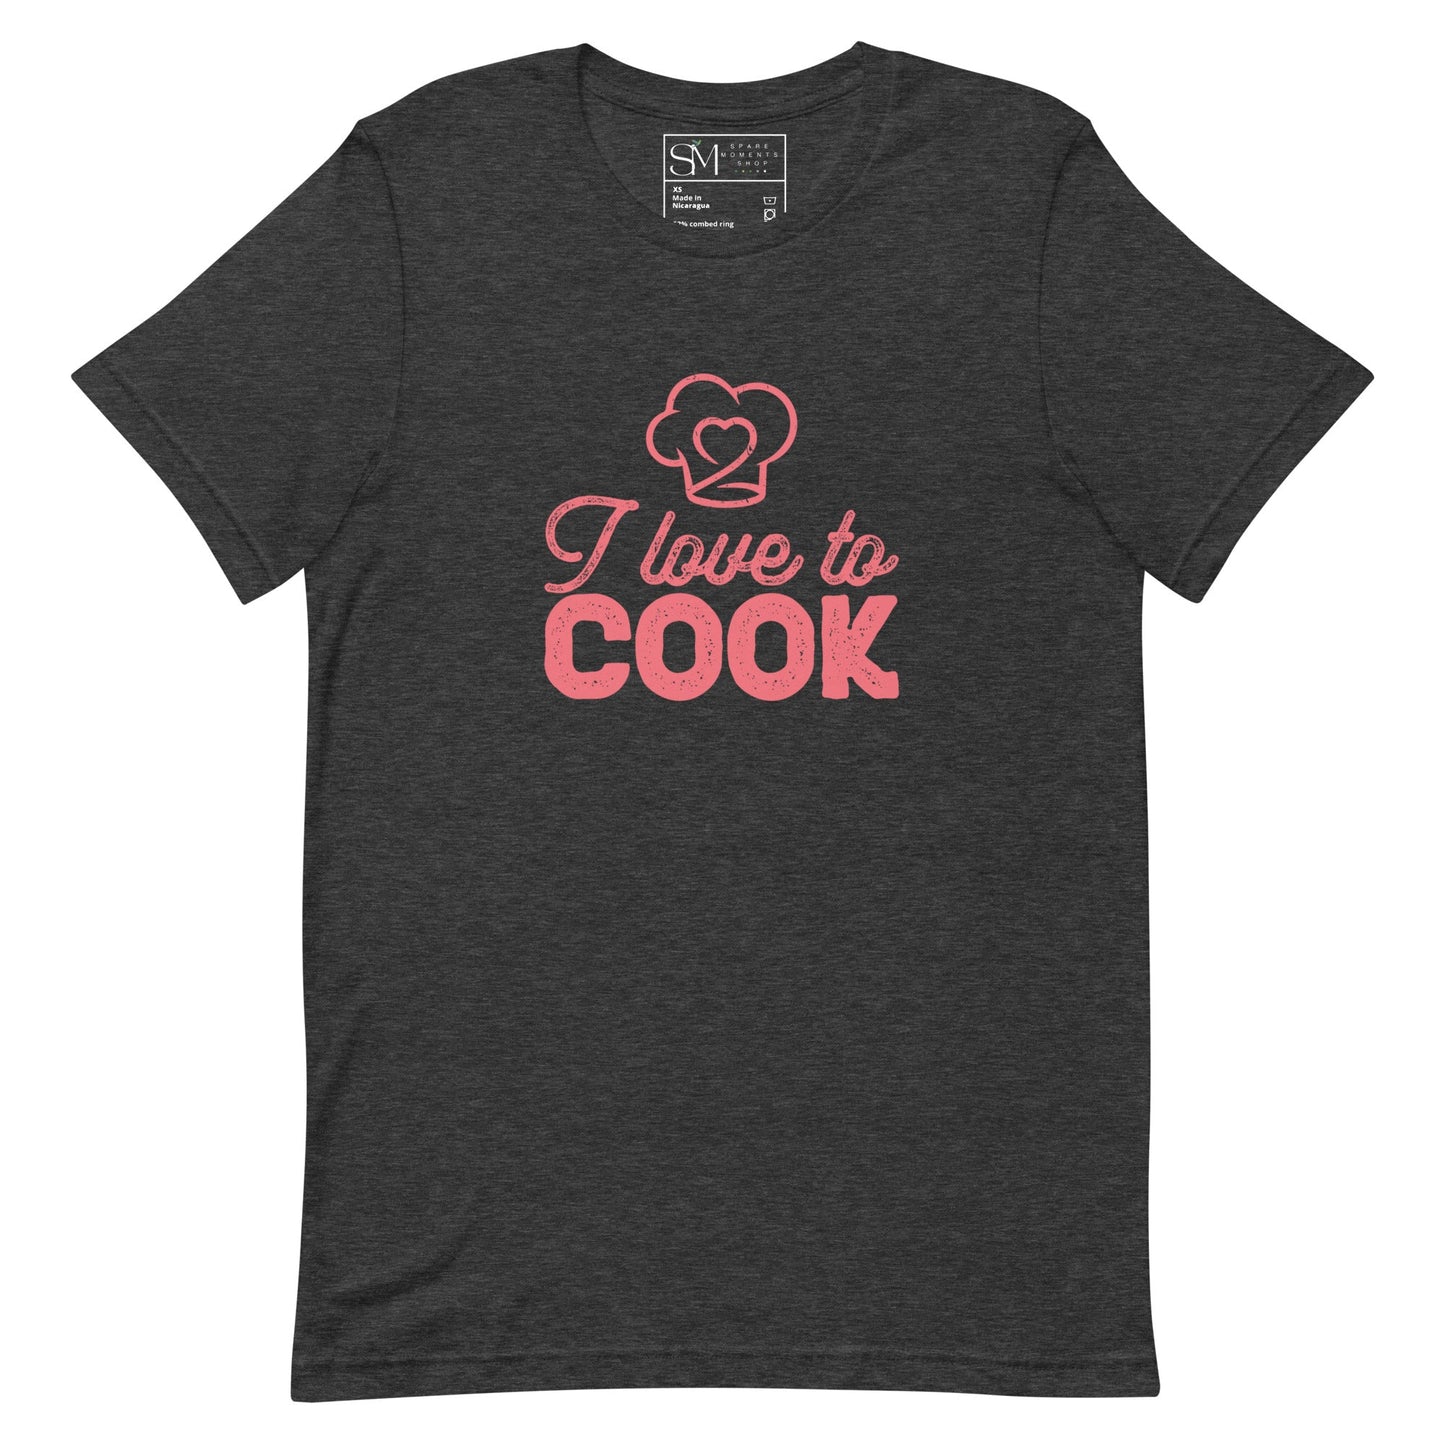 I LOVE TO COOK | Unisex t-shirt